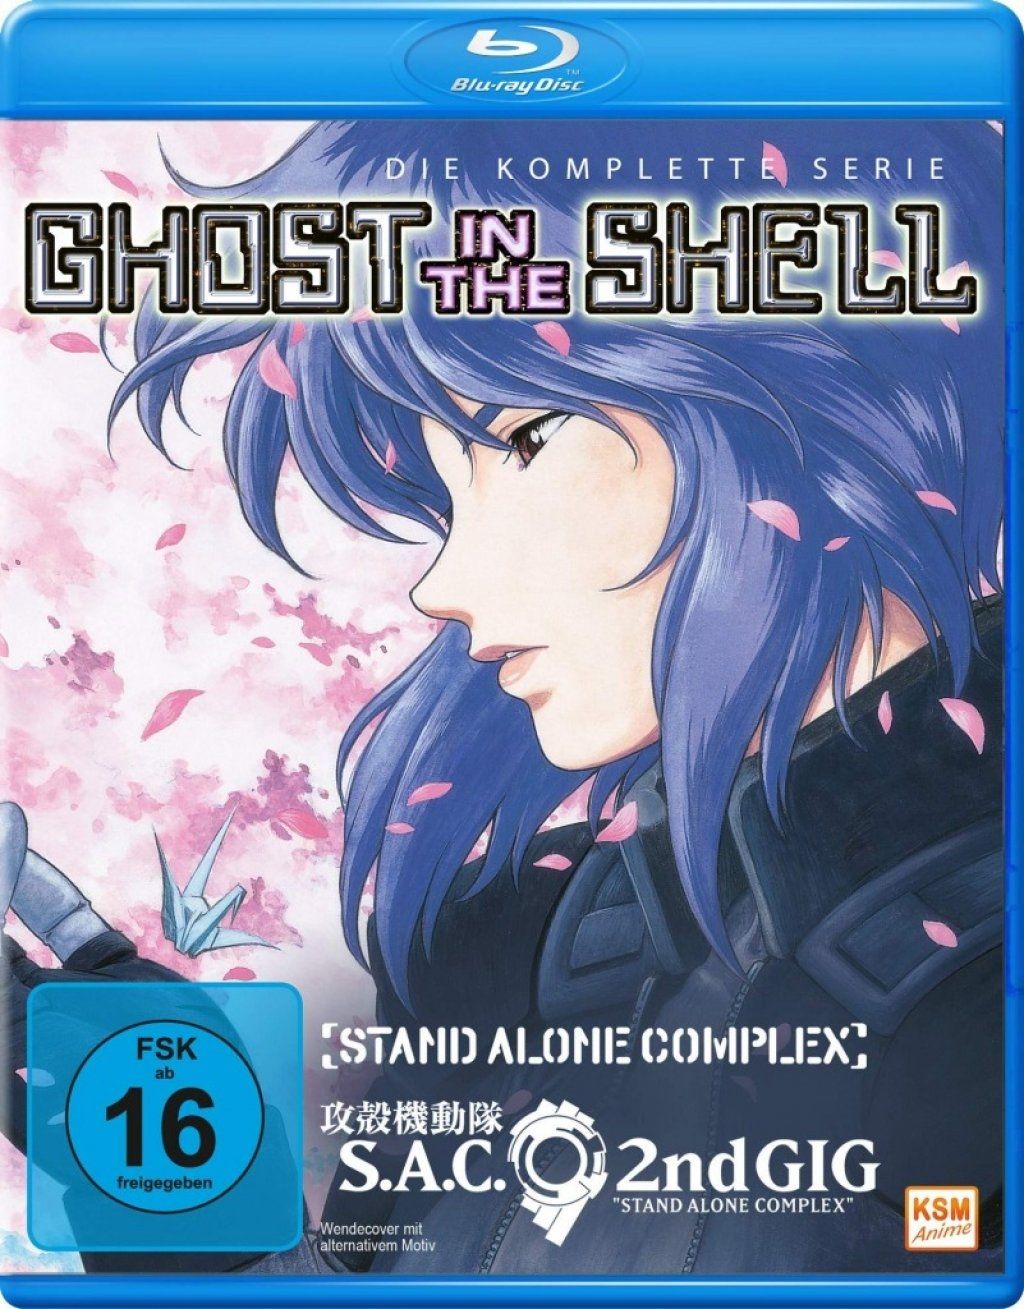 Ghost in the Shell: Stand Alone Complex - S.A.C. & S.A.C. 2nd GIG Gesamtedition (8 Discs) (BLURAY)